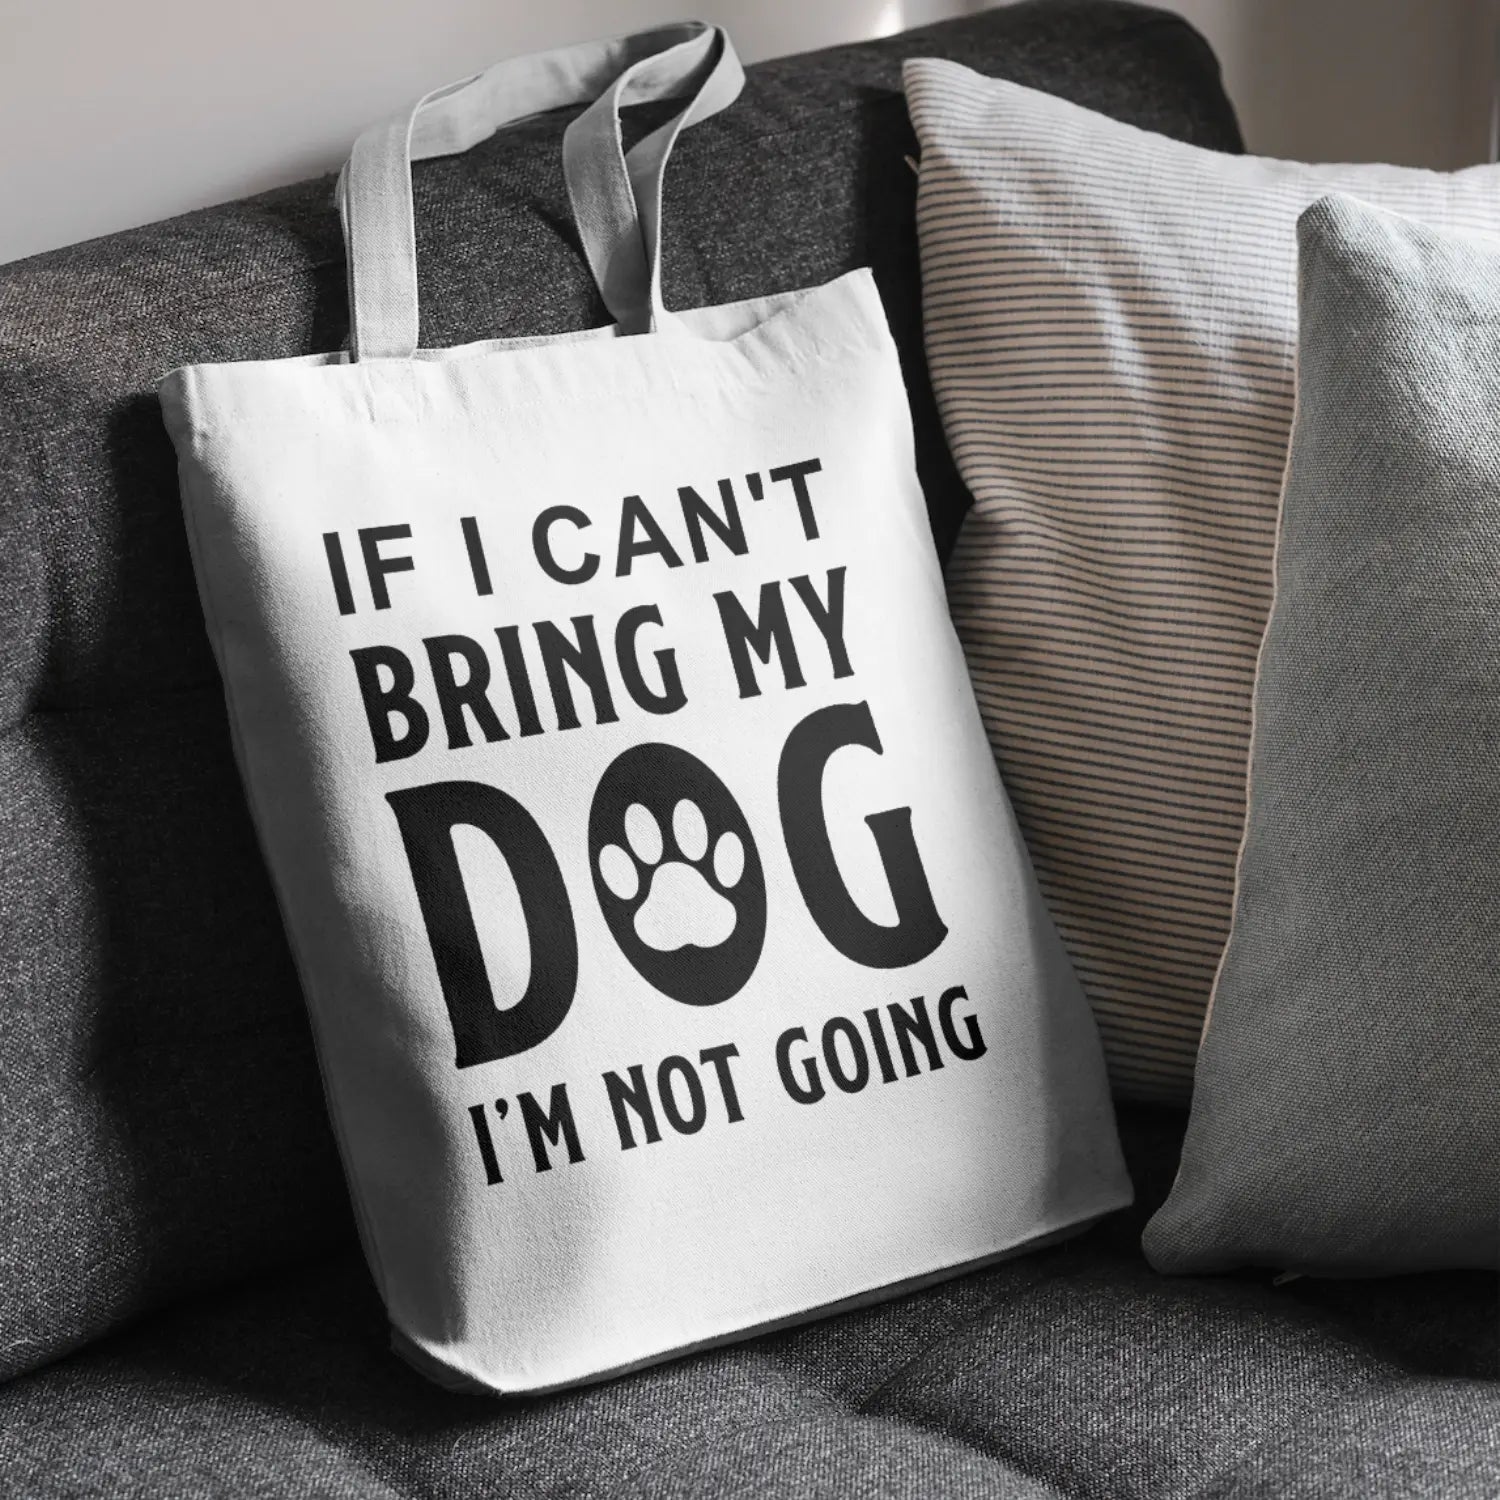 If I Can't Bring My Dog I'm Not Going SVG | Digital Download | Cut File | SVG Only The Sweet Stuff